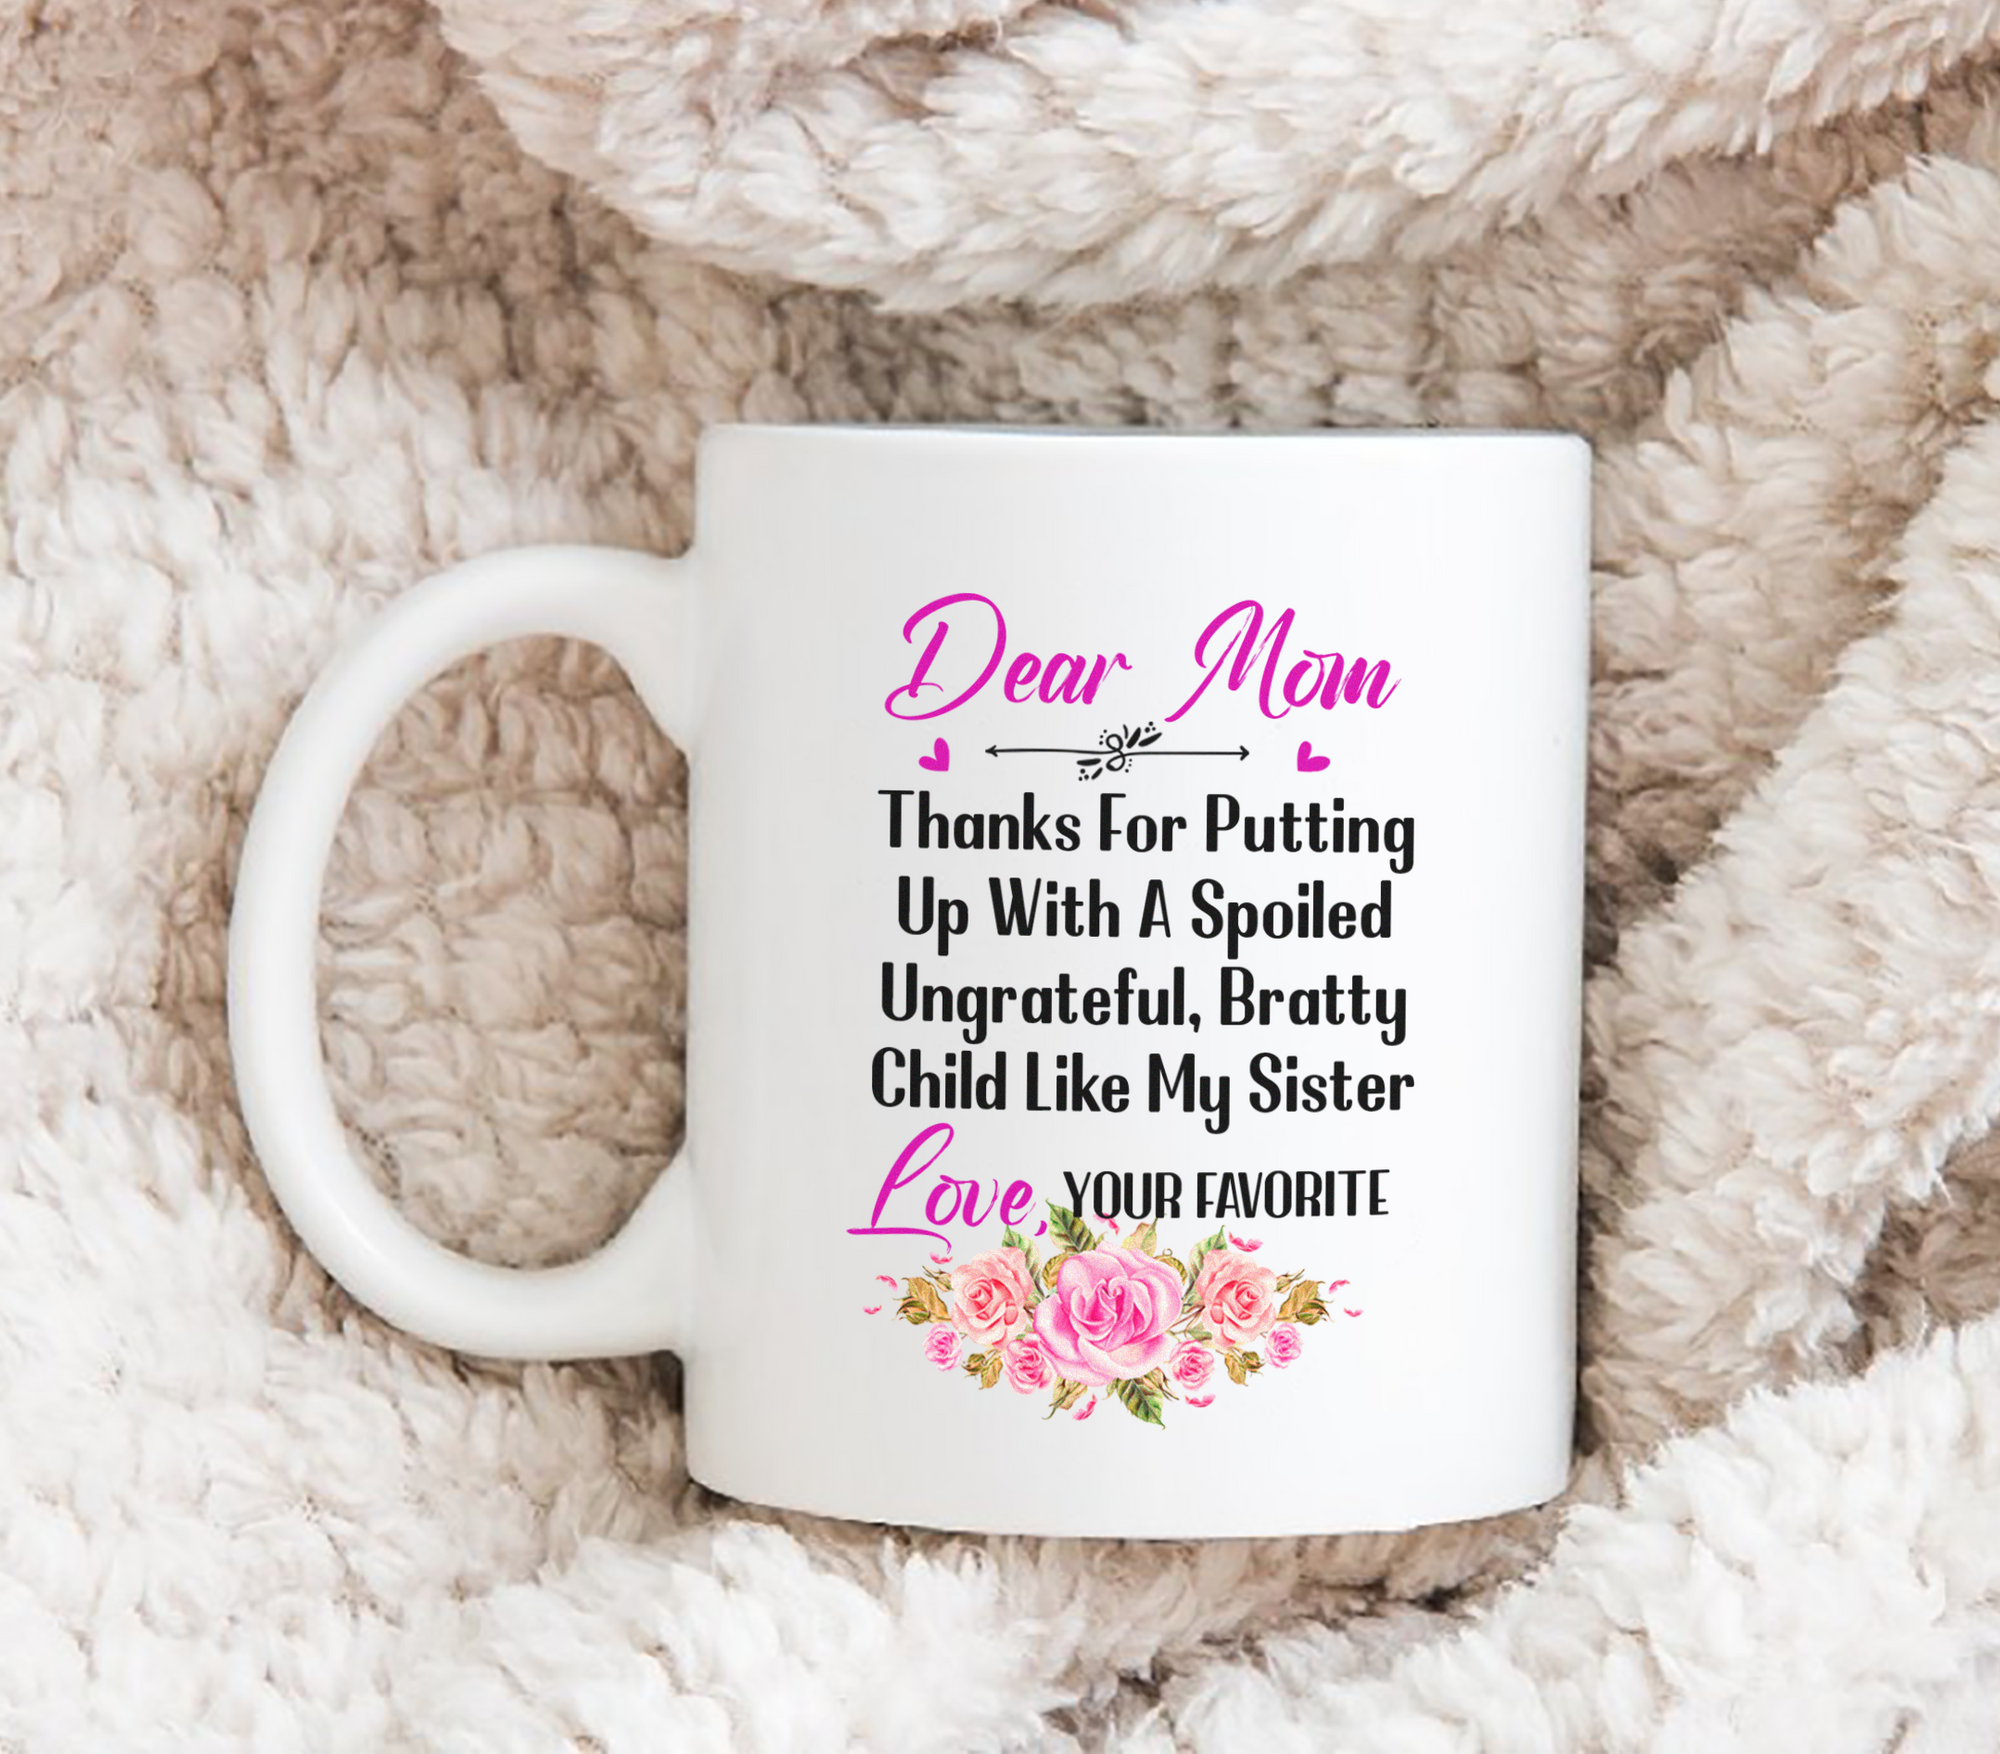 Dear Mom Thanks For Putting Up With A Spoiled, Ungrateful, Bratty Child Like My Sister - White Mug MG24